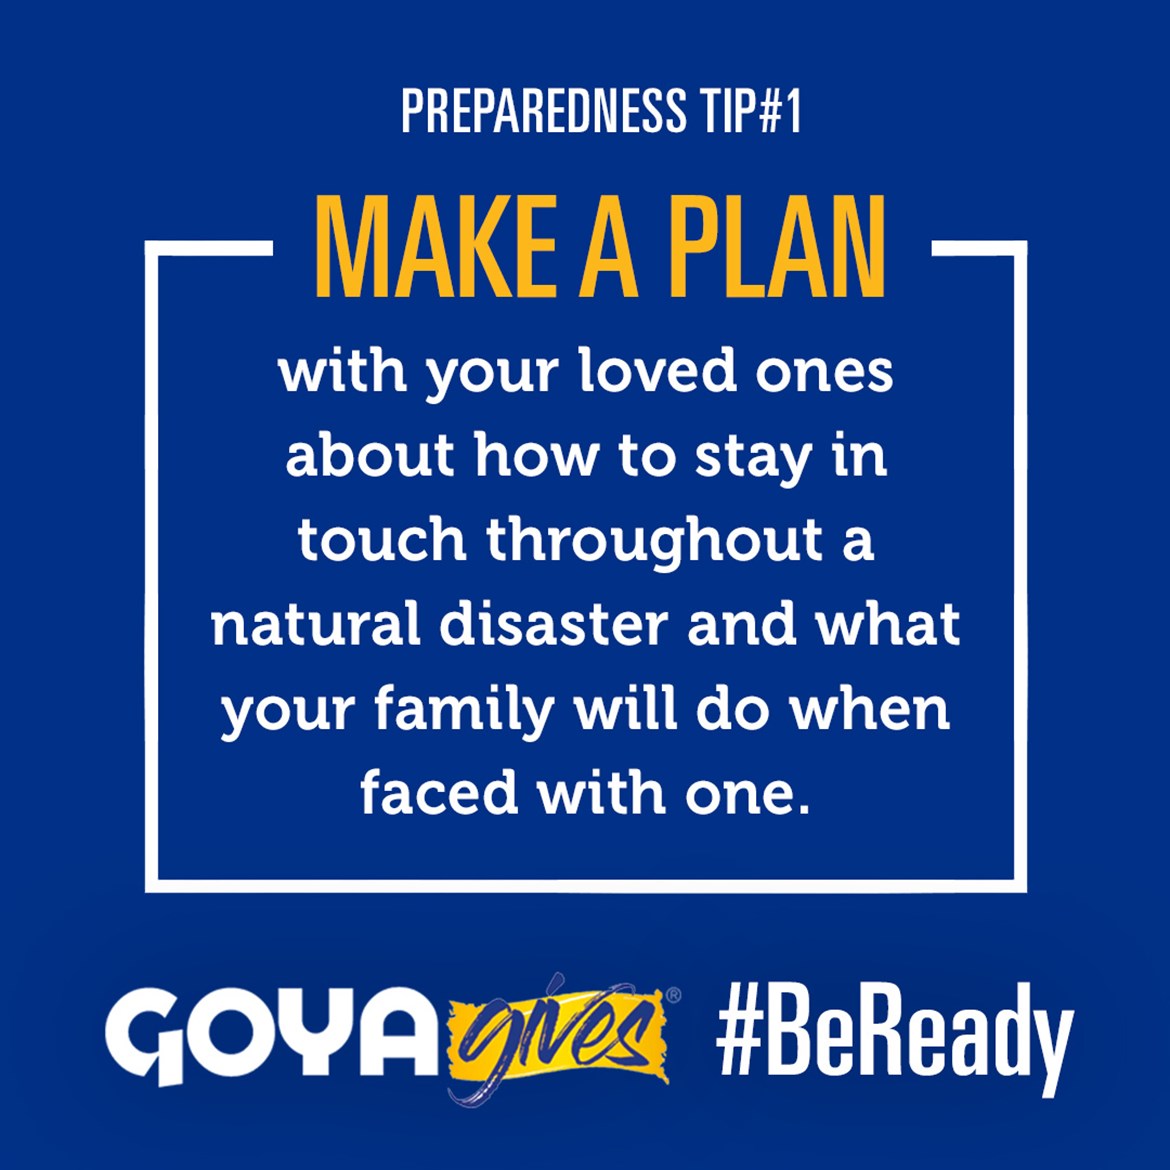 Press Release: GOYA ENCOURAGES FAMILIES TO STAY SAFE AND PREPARED AMIDST NATURAL DISASTERS AND COVID-19 PANDEMIC